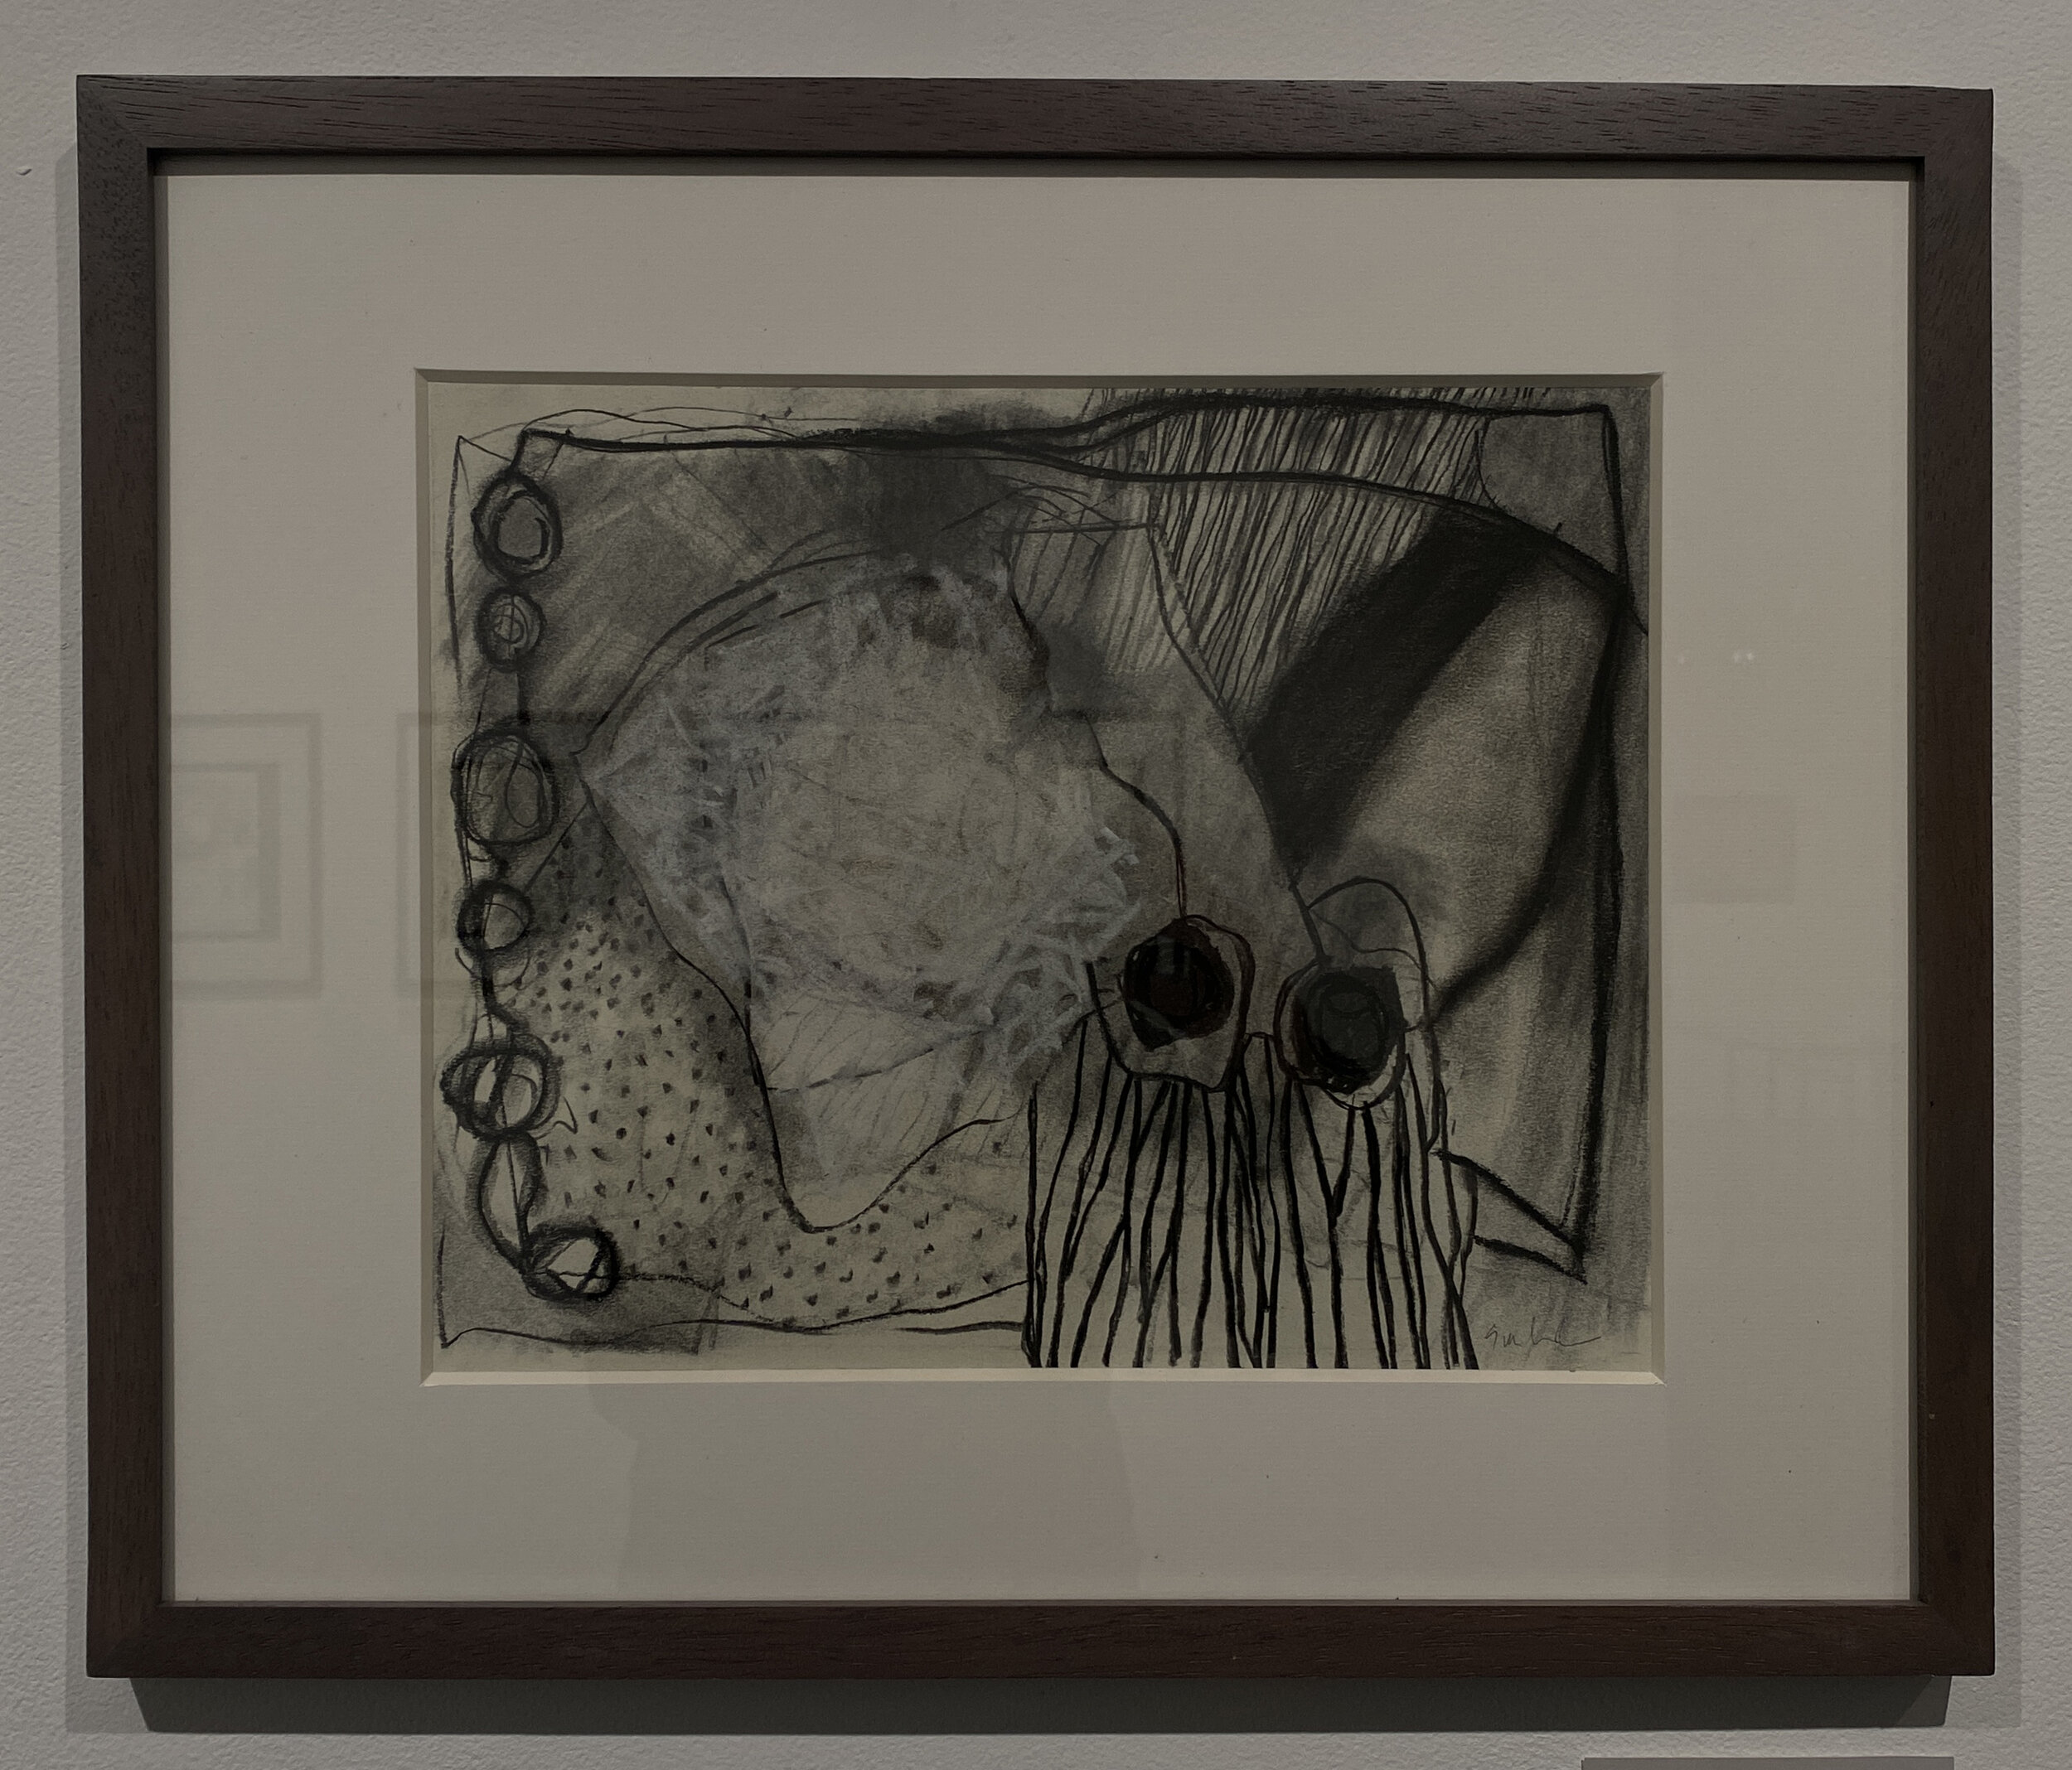  Pandemic drawing #58 (What will we do without us?) (2020)  charcoal, compressed charcoal and mixed media on paper  10½ x 13½ inches 